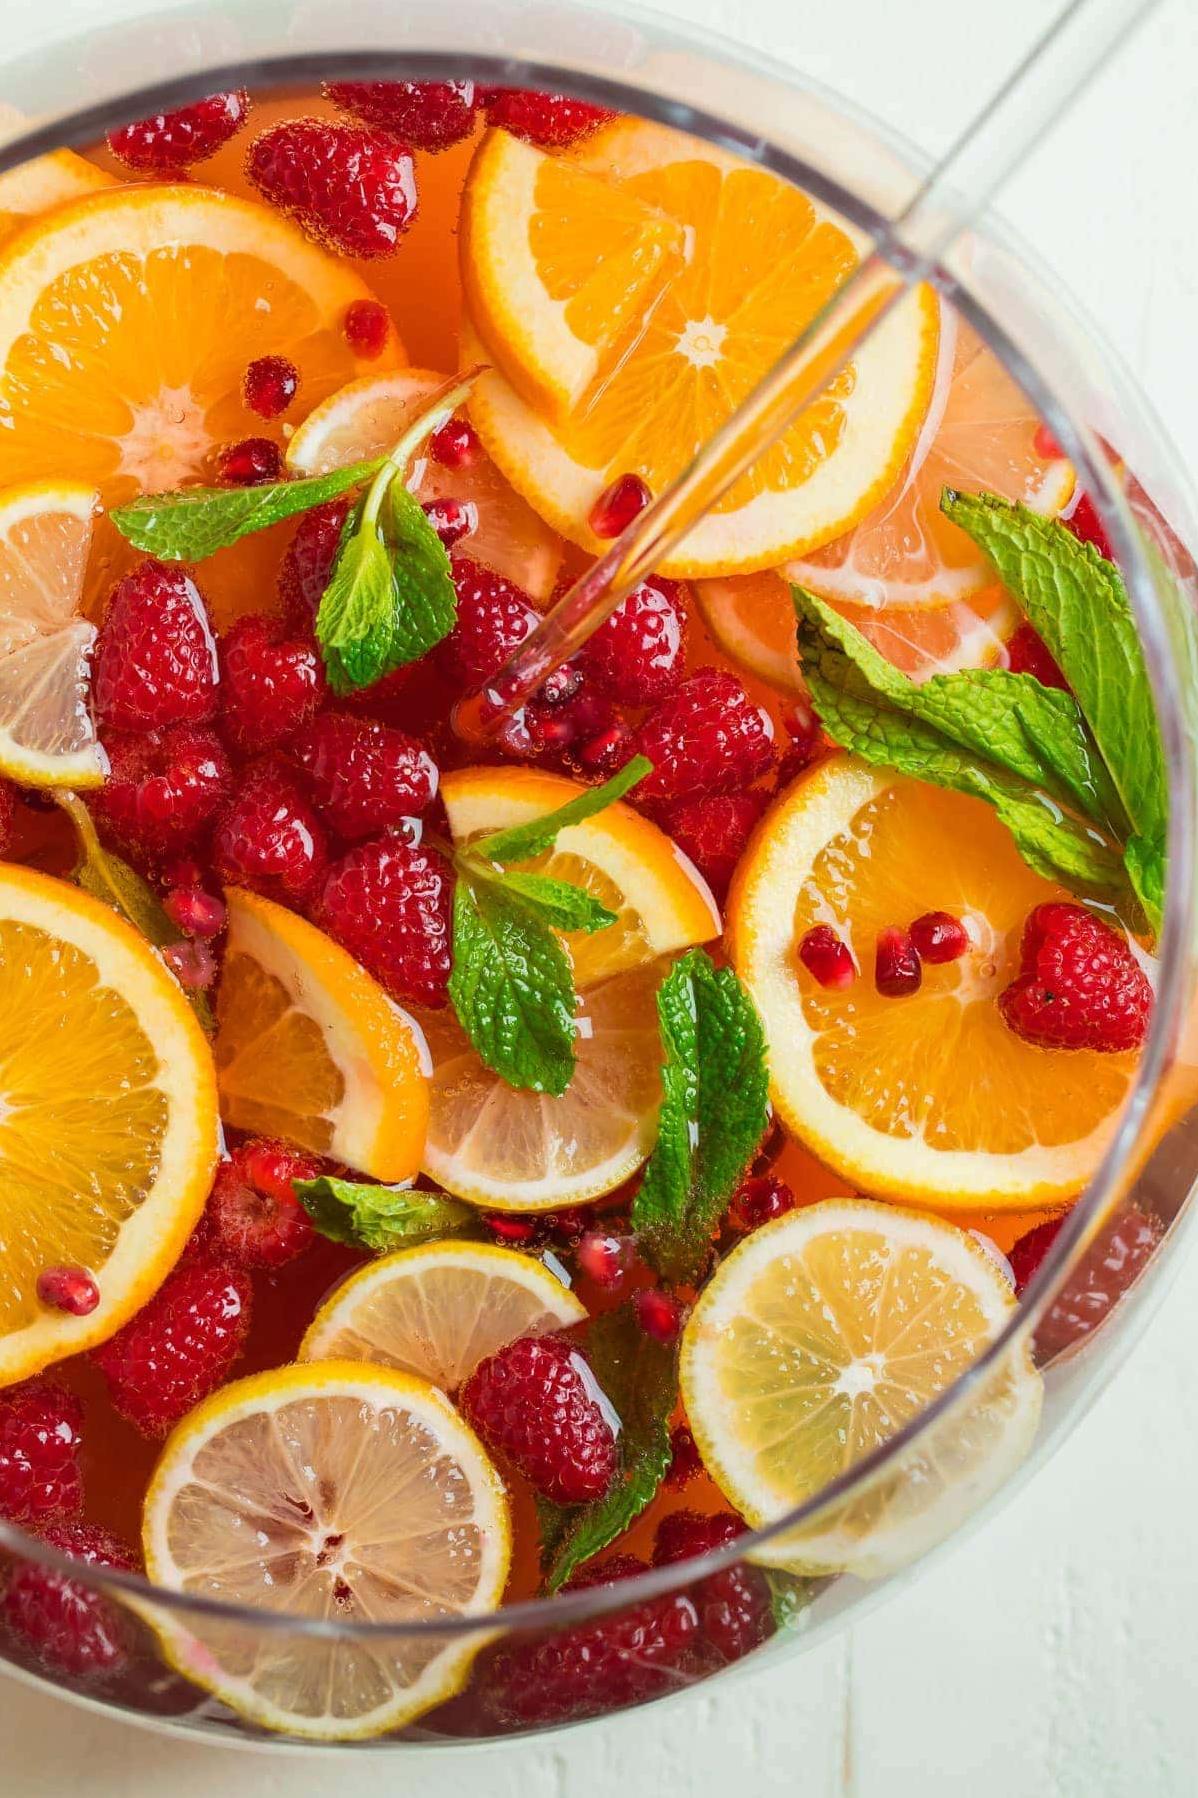  Celebrate in style with this delicious Champagne punch!